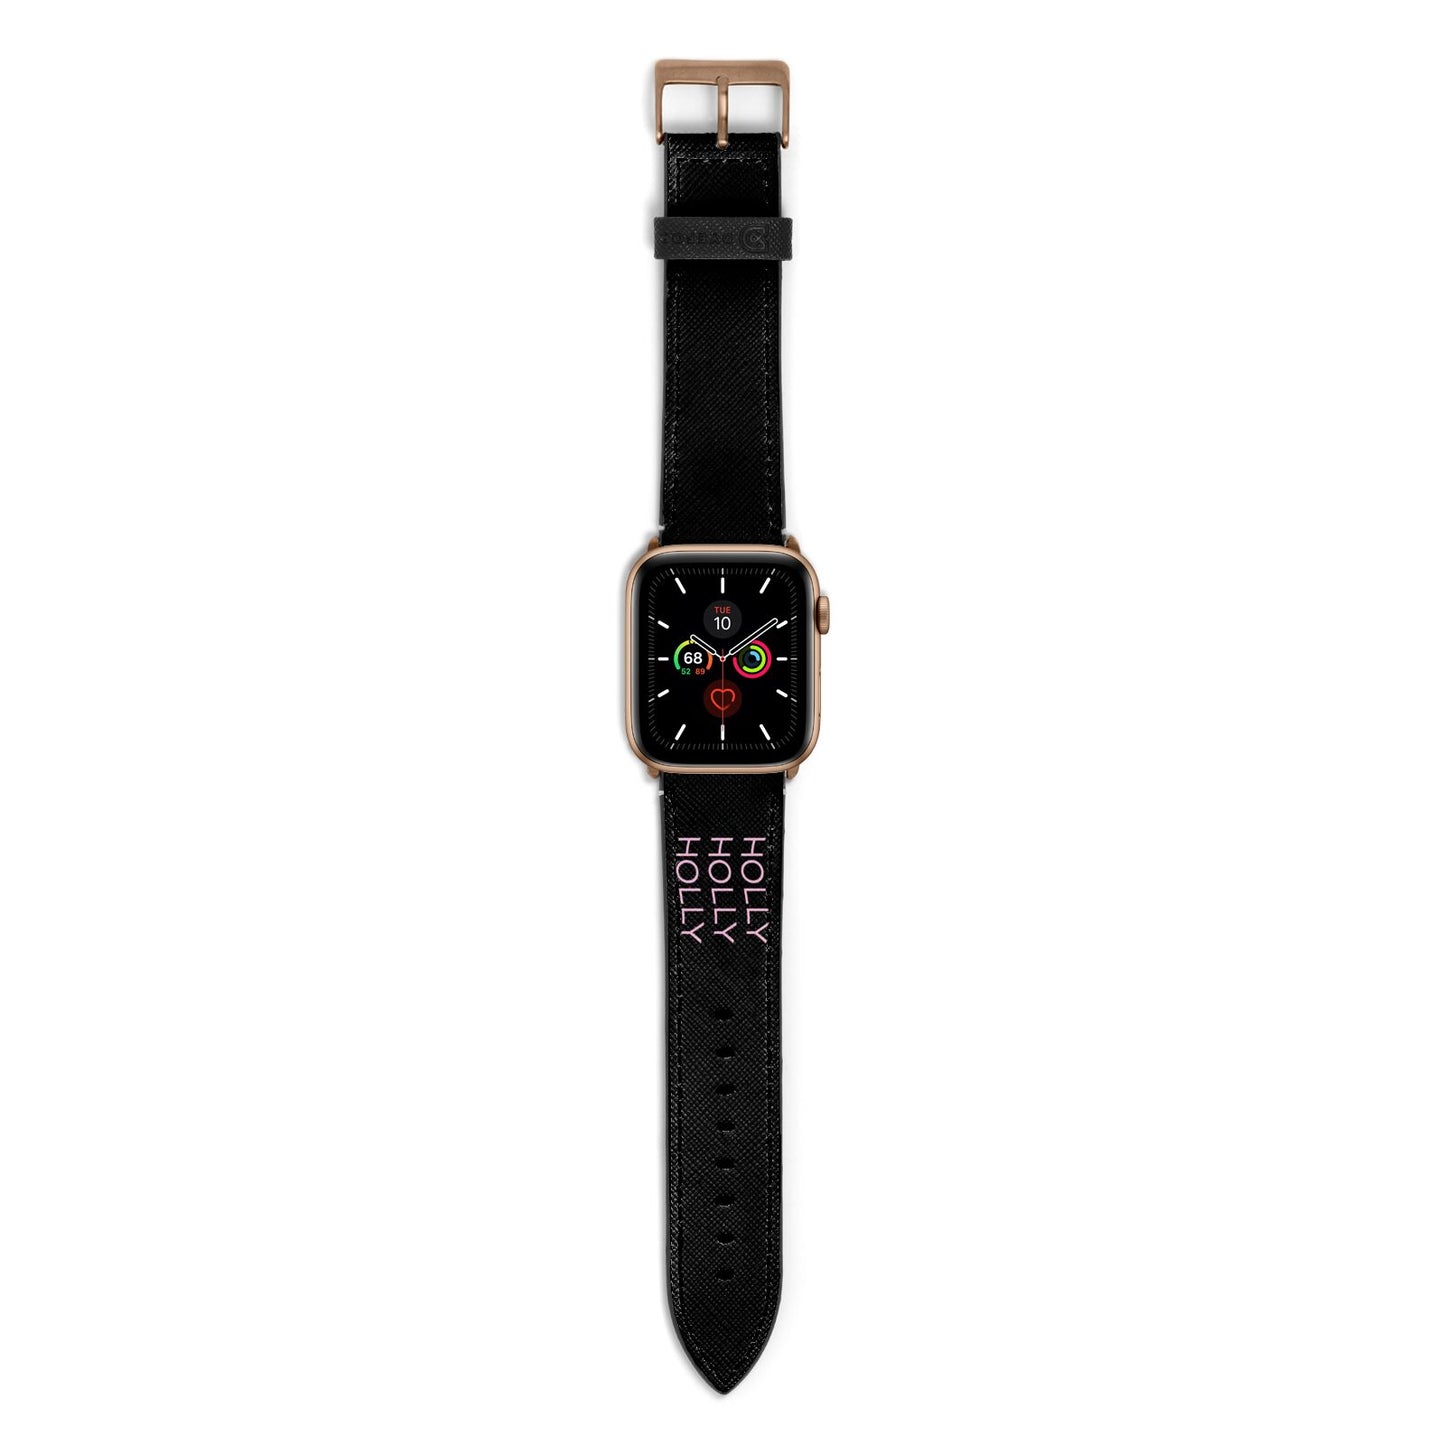 Wavy Name Apple Watch Strap with Gold Hardware